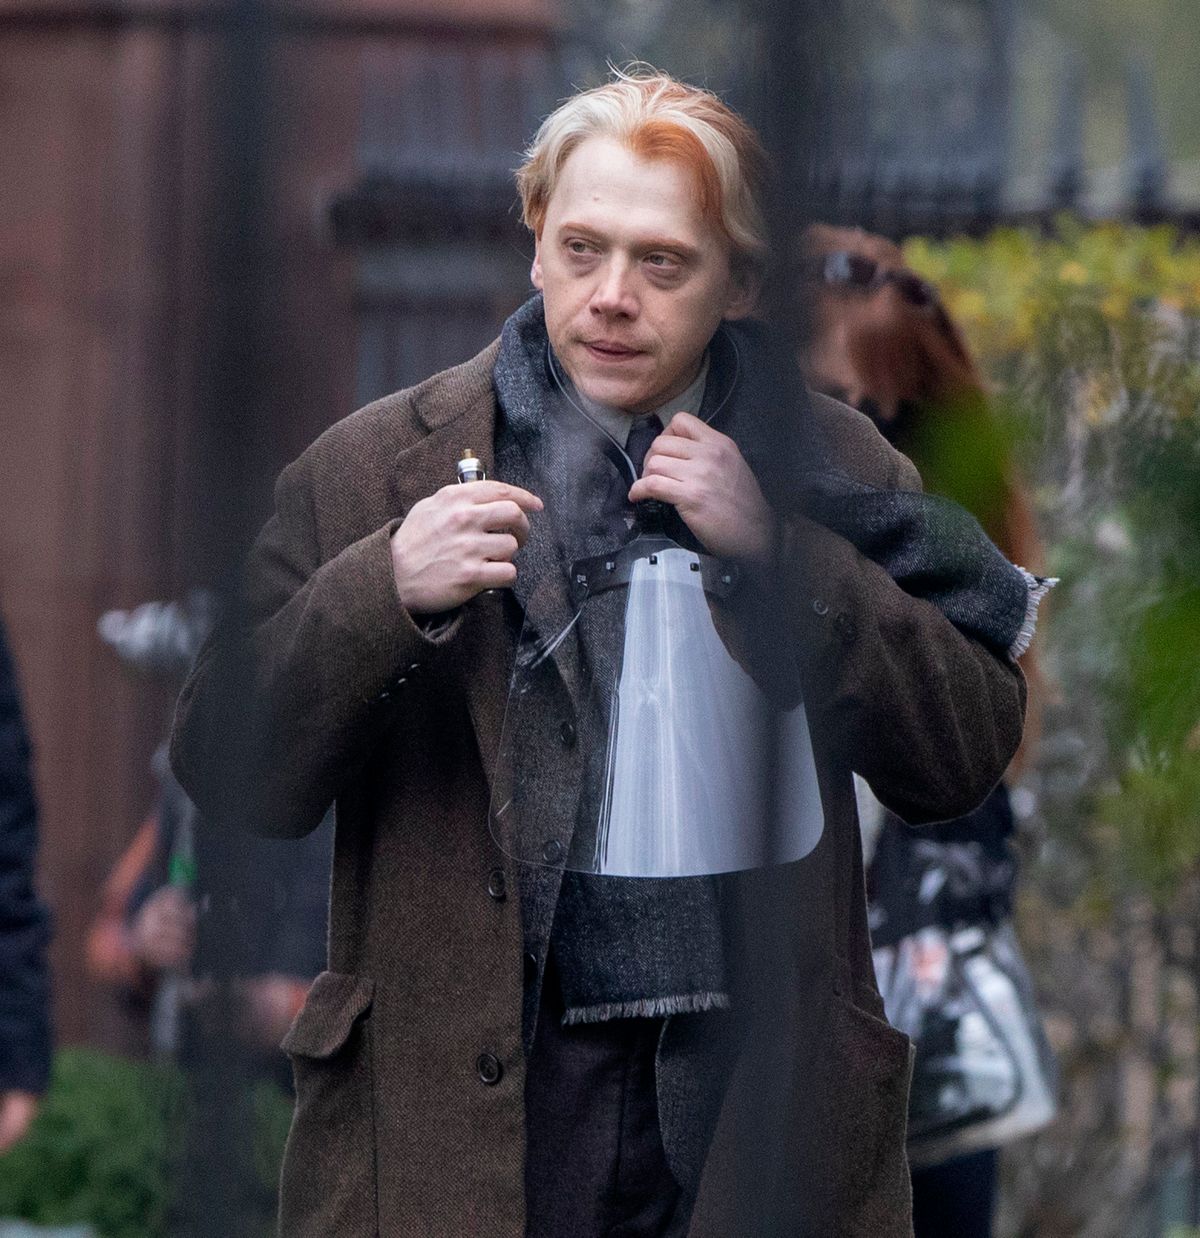 EXCLUSIVE: Rupert Grint Spotted For the First Time on the Set of Guillermo del Toro's Cabinet of Curiosities.